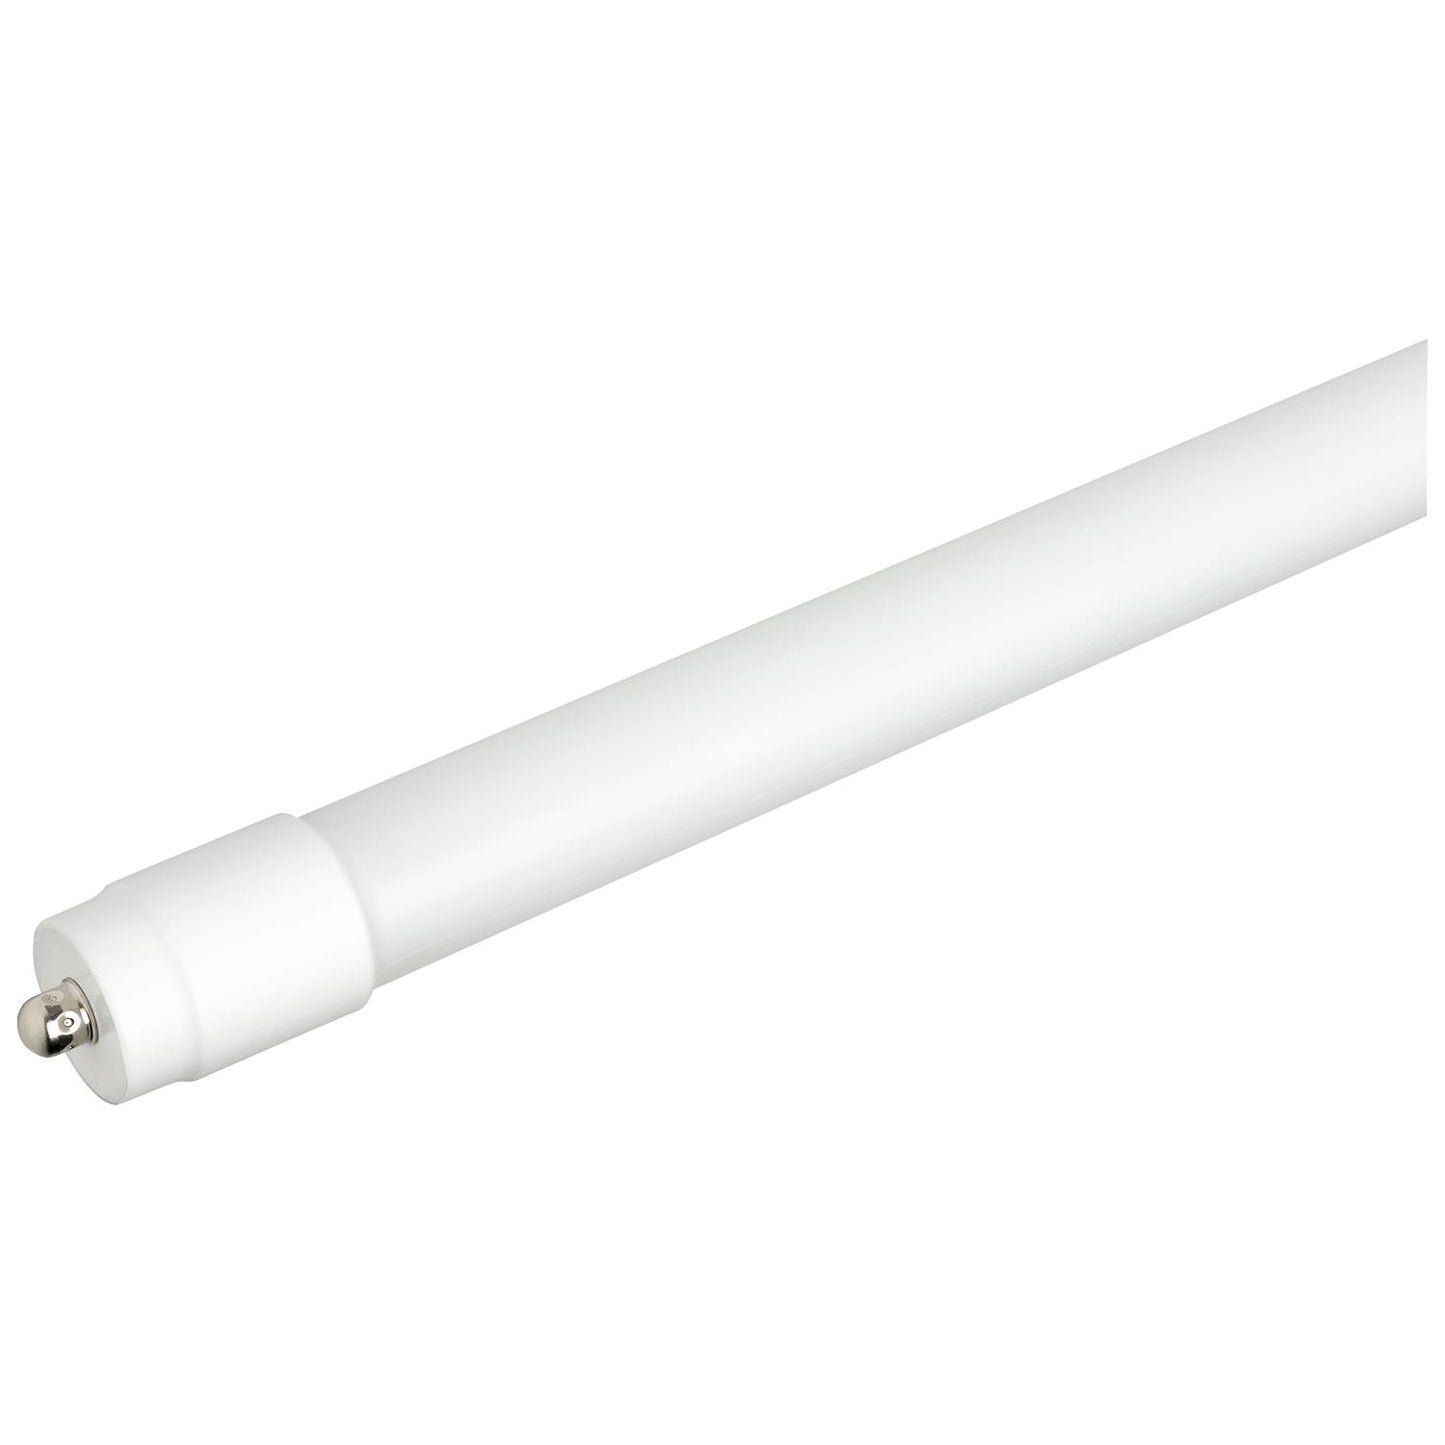 Sunlite T8/LED/ADV/8'/43W/65K LED T8 43W 8 Foot Bypass Dual End Single Pin Base, 6500K Daylight with PET Coating